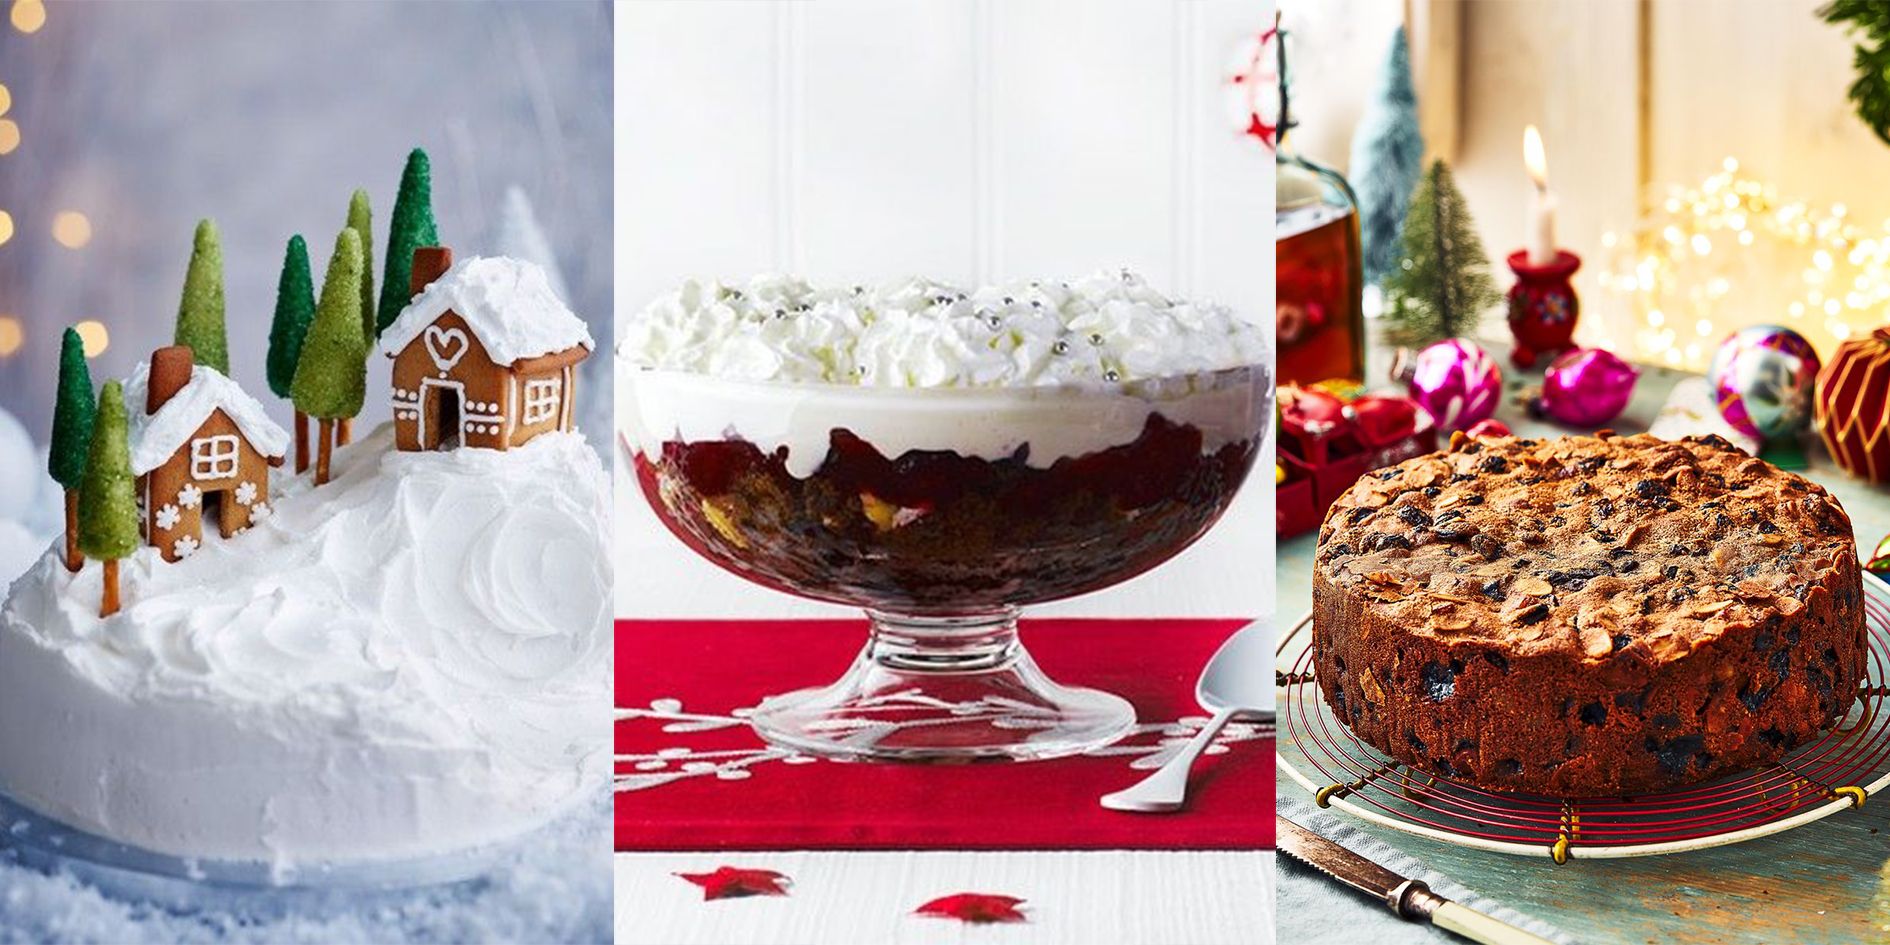 Fancy Christmas Cakes | Recipe | Holiday desserts, Christmas desserts cakes,  Holiday baking